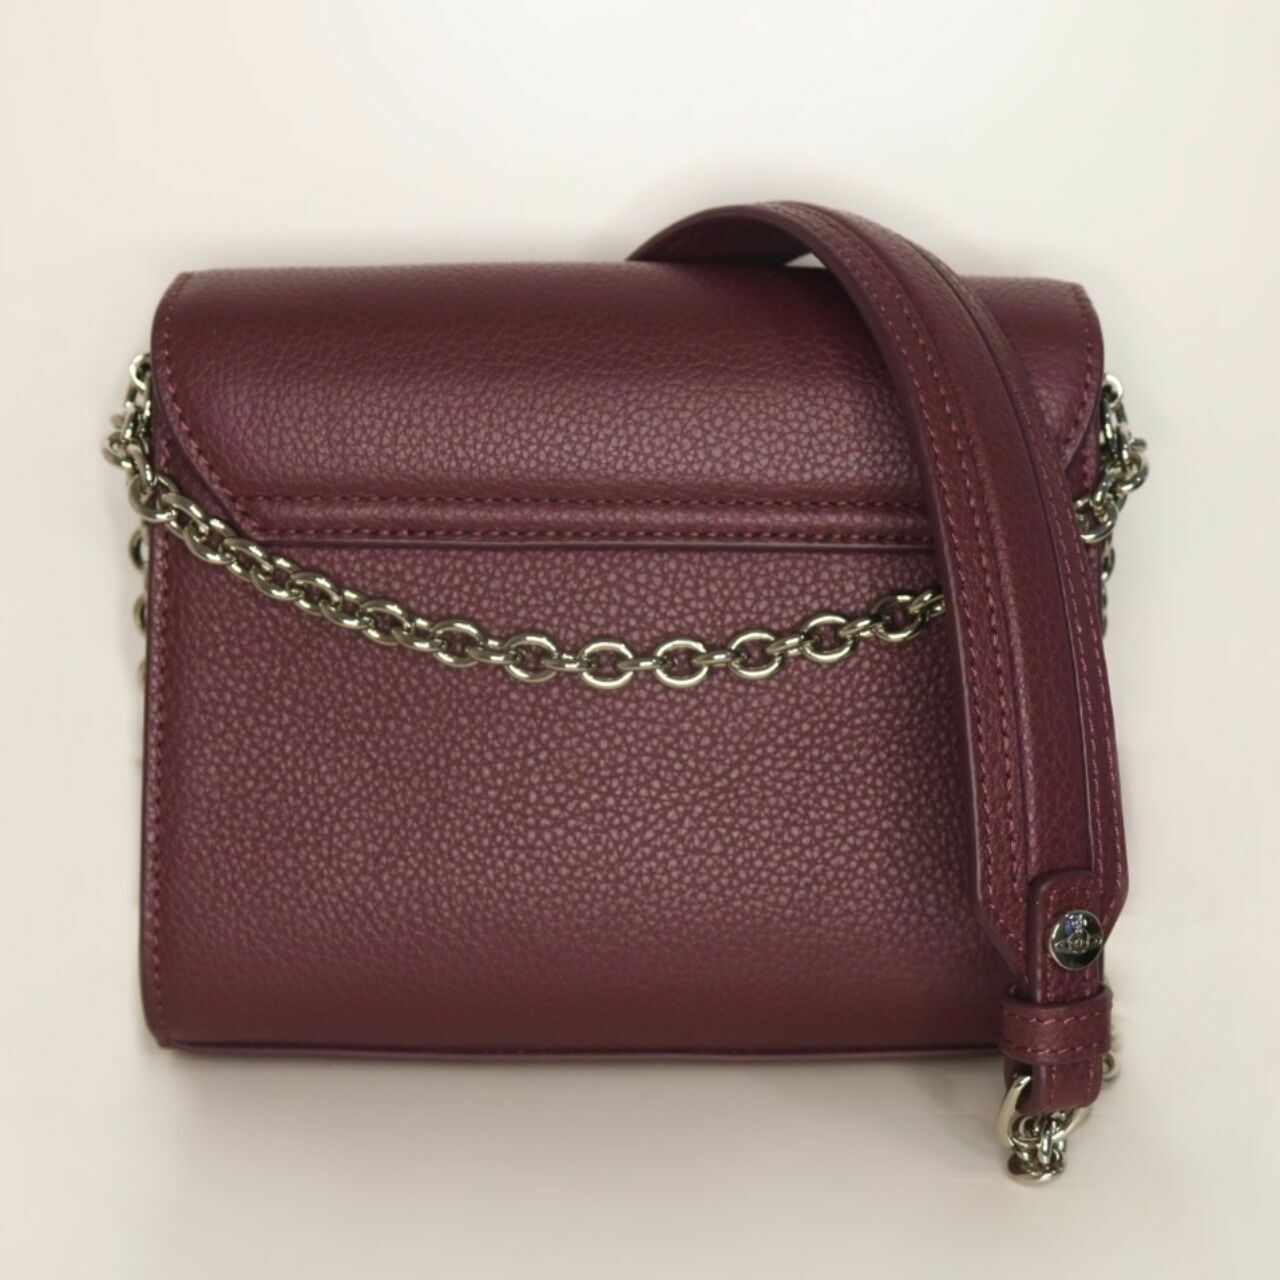 Vivienne Westwood Lucy Small Crossbody Bag